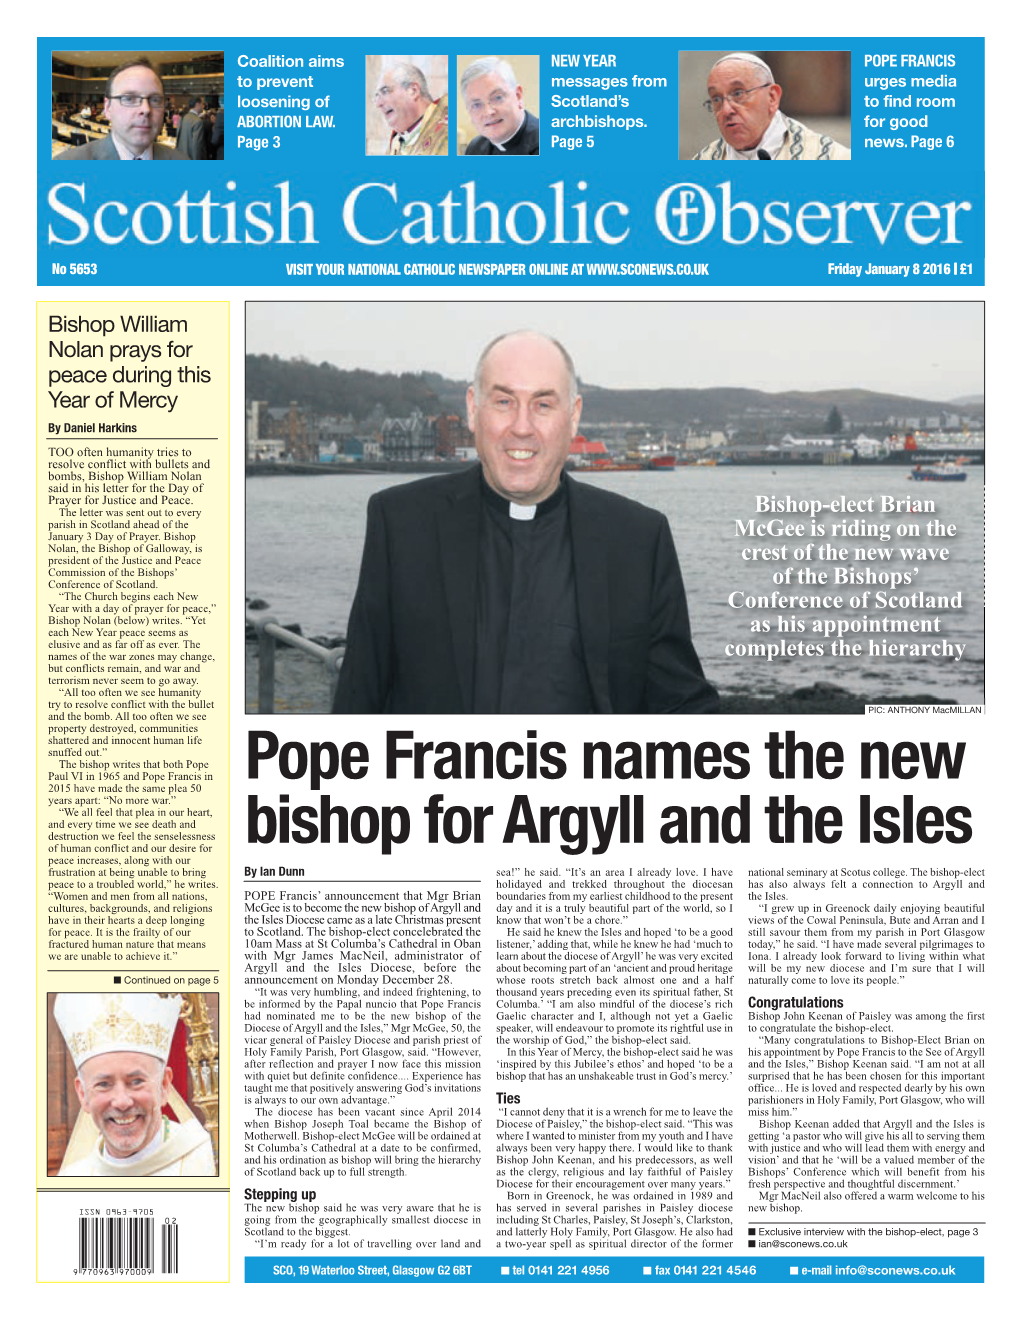 Pope Francis Names the New Bishop for Argyll and the Isles